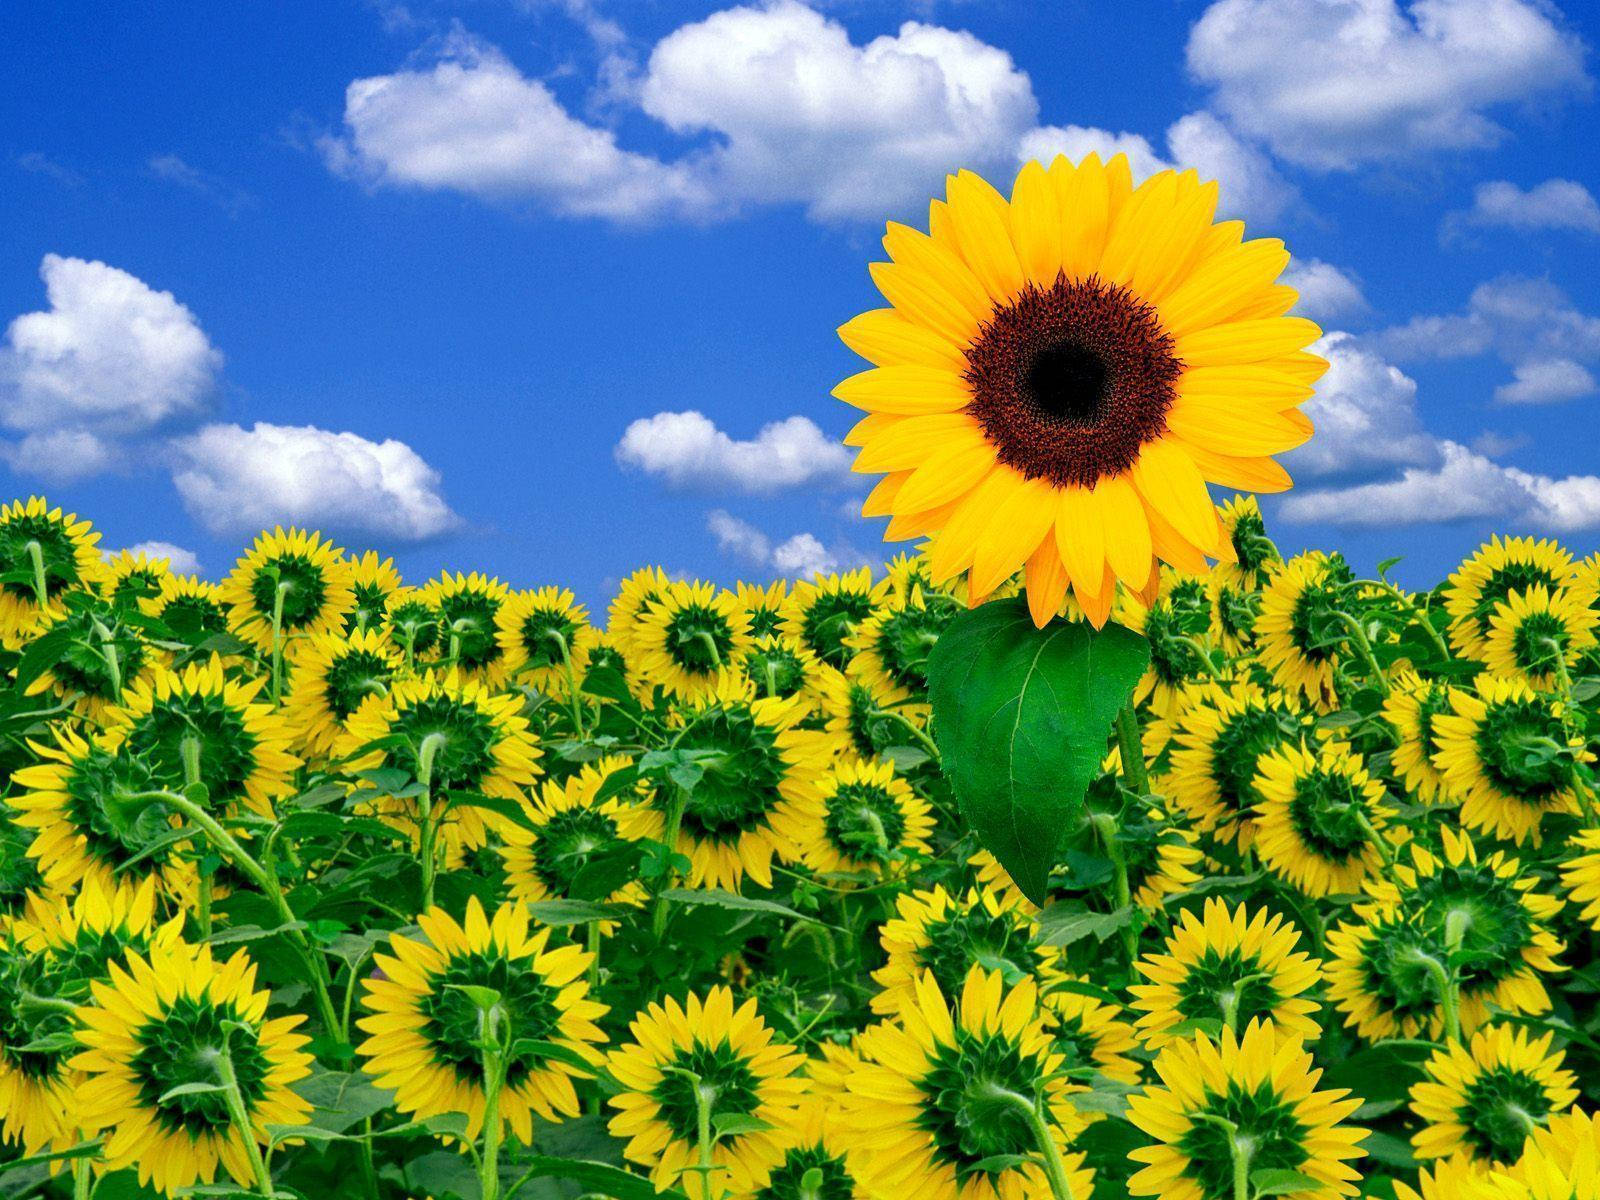 A Sunflower Field With Clouds In The Background Wallpaper